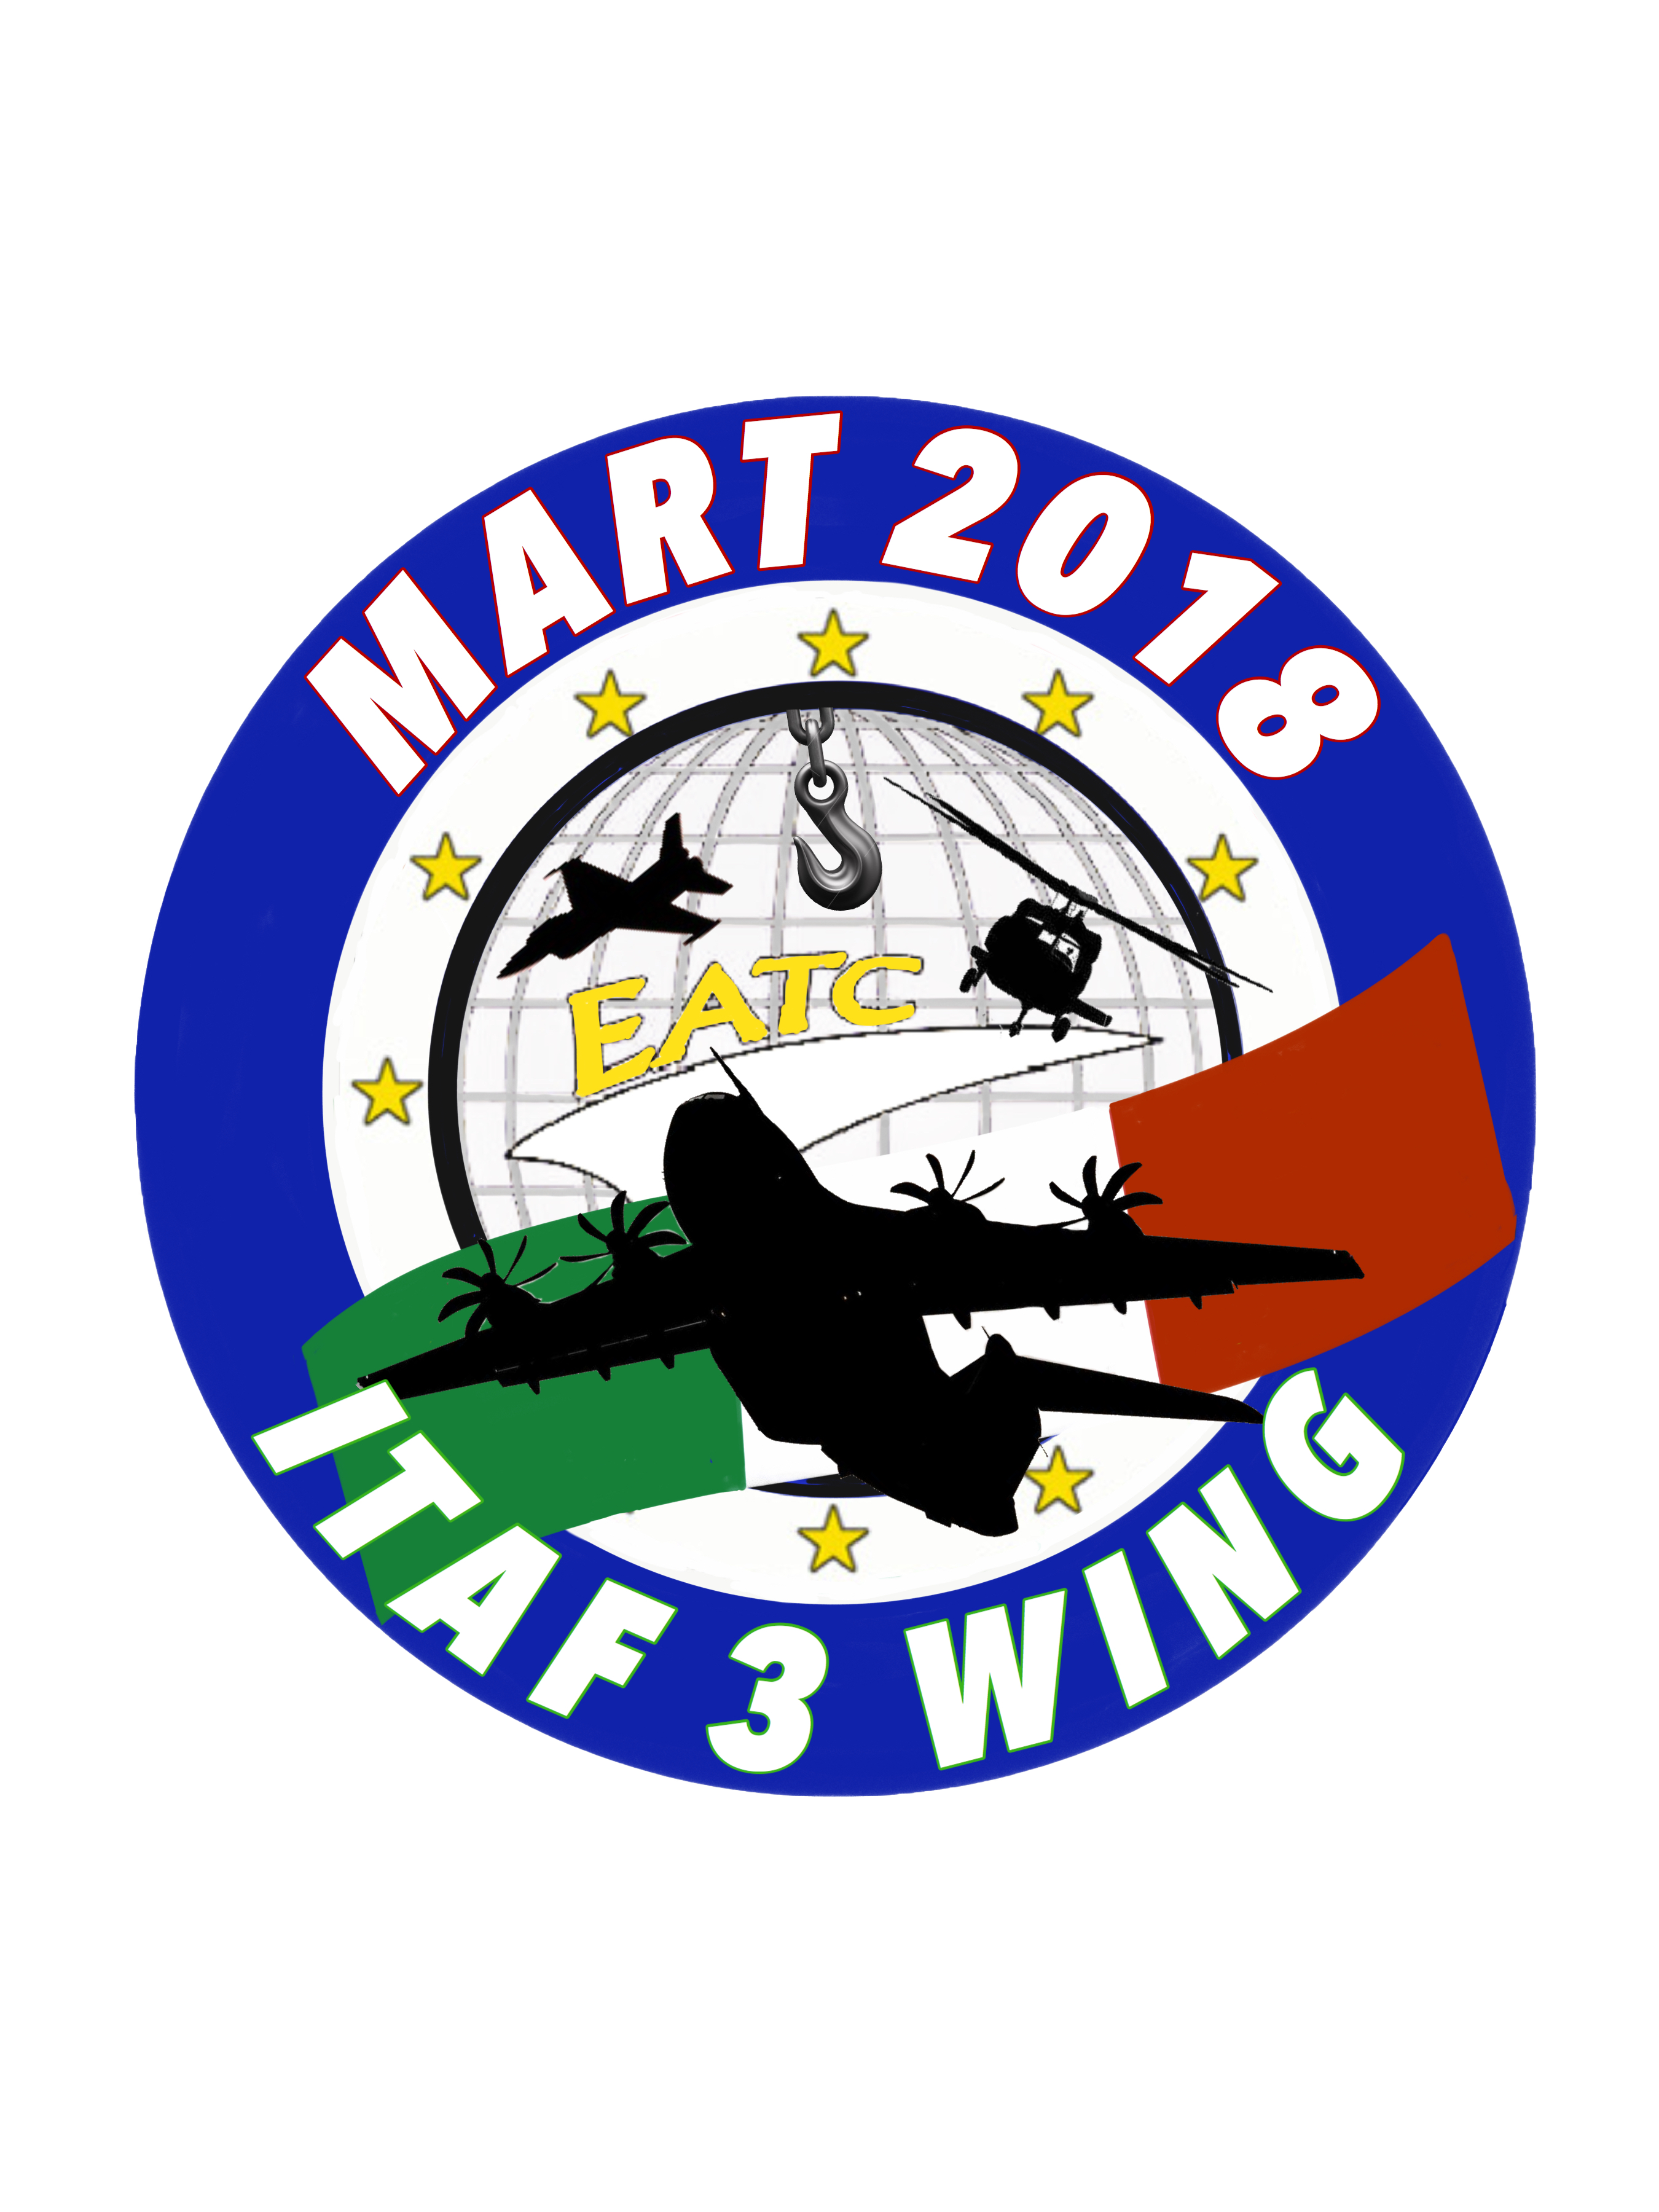 EATC’s latest aide-mémoire for air recovery training introduced at MART 2018